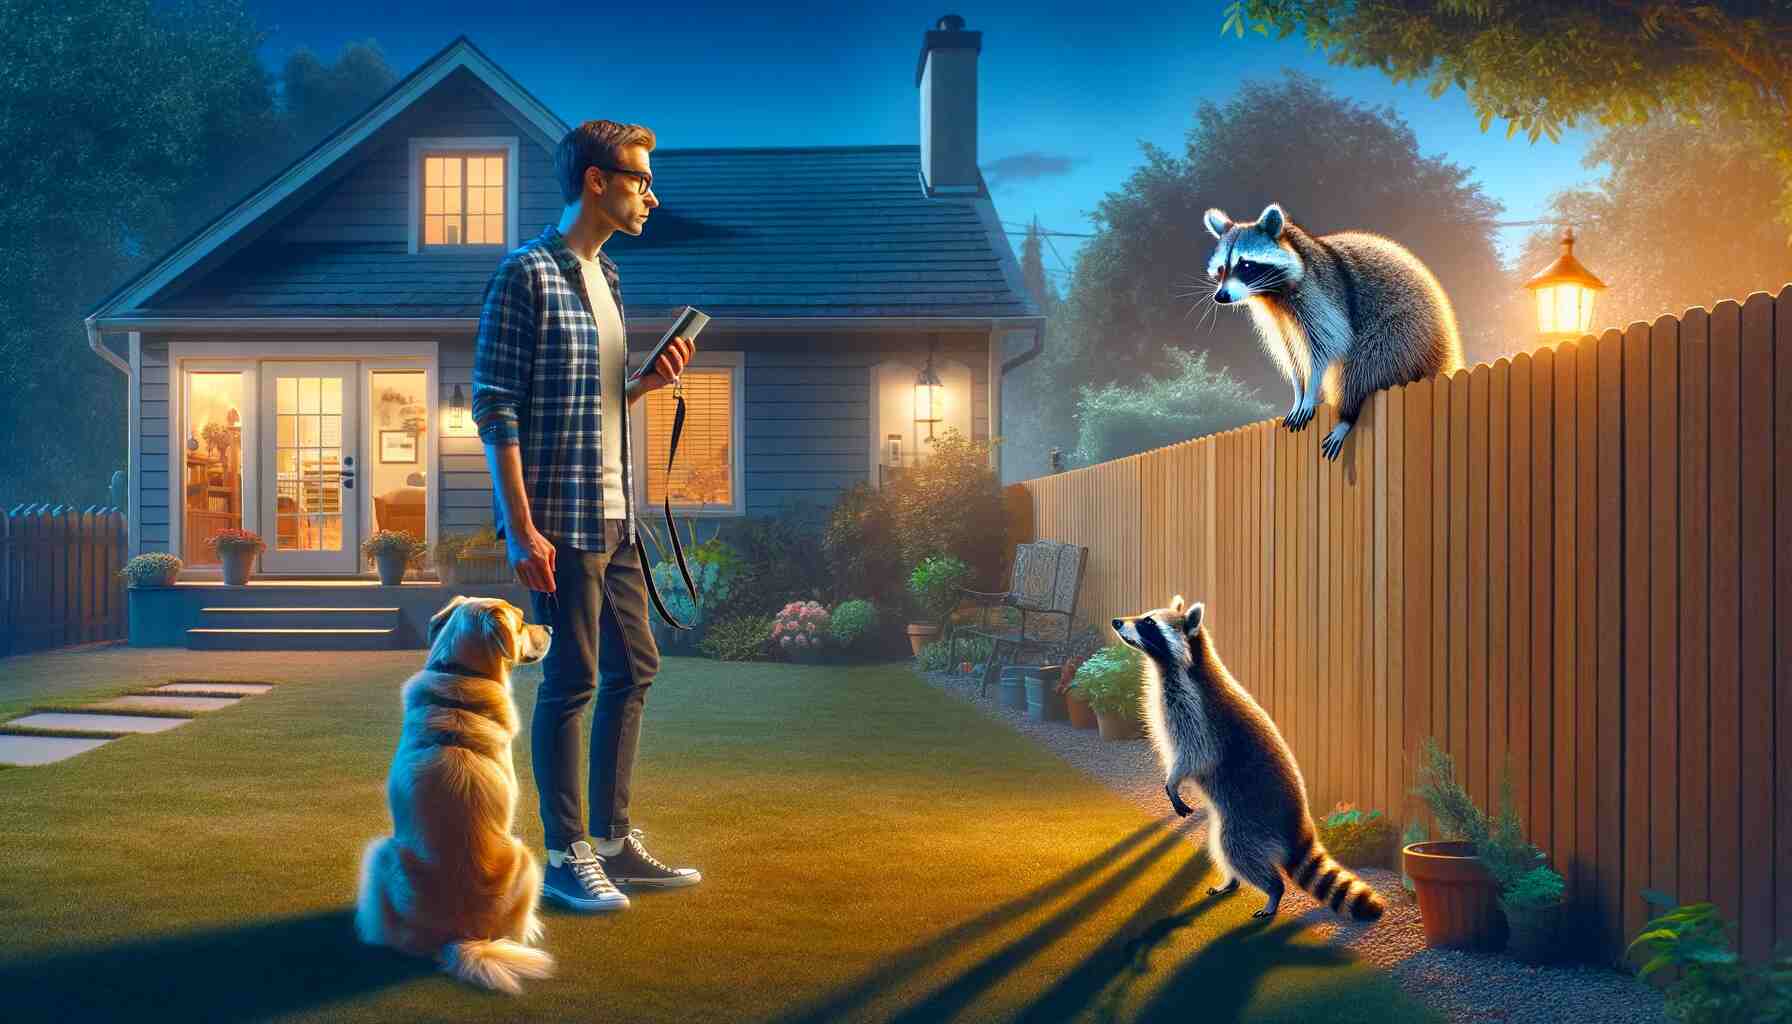 Here is the featured image for “Can a Raccoon Hurt a Dog: Risks and Preventive Measures,” depicting a suburban backyard scene with a dog, a raccoon, and a concerned dog owner.